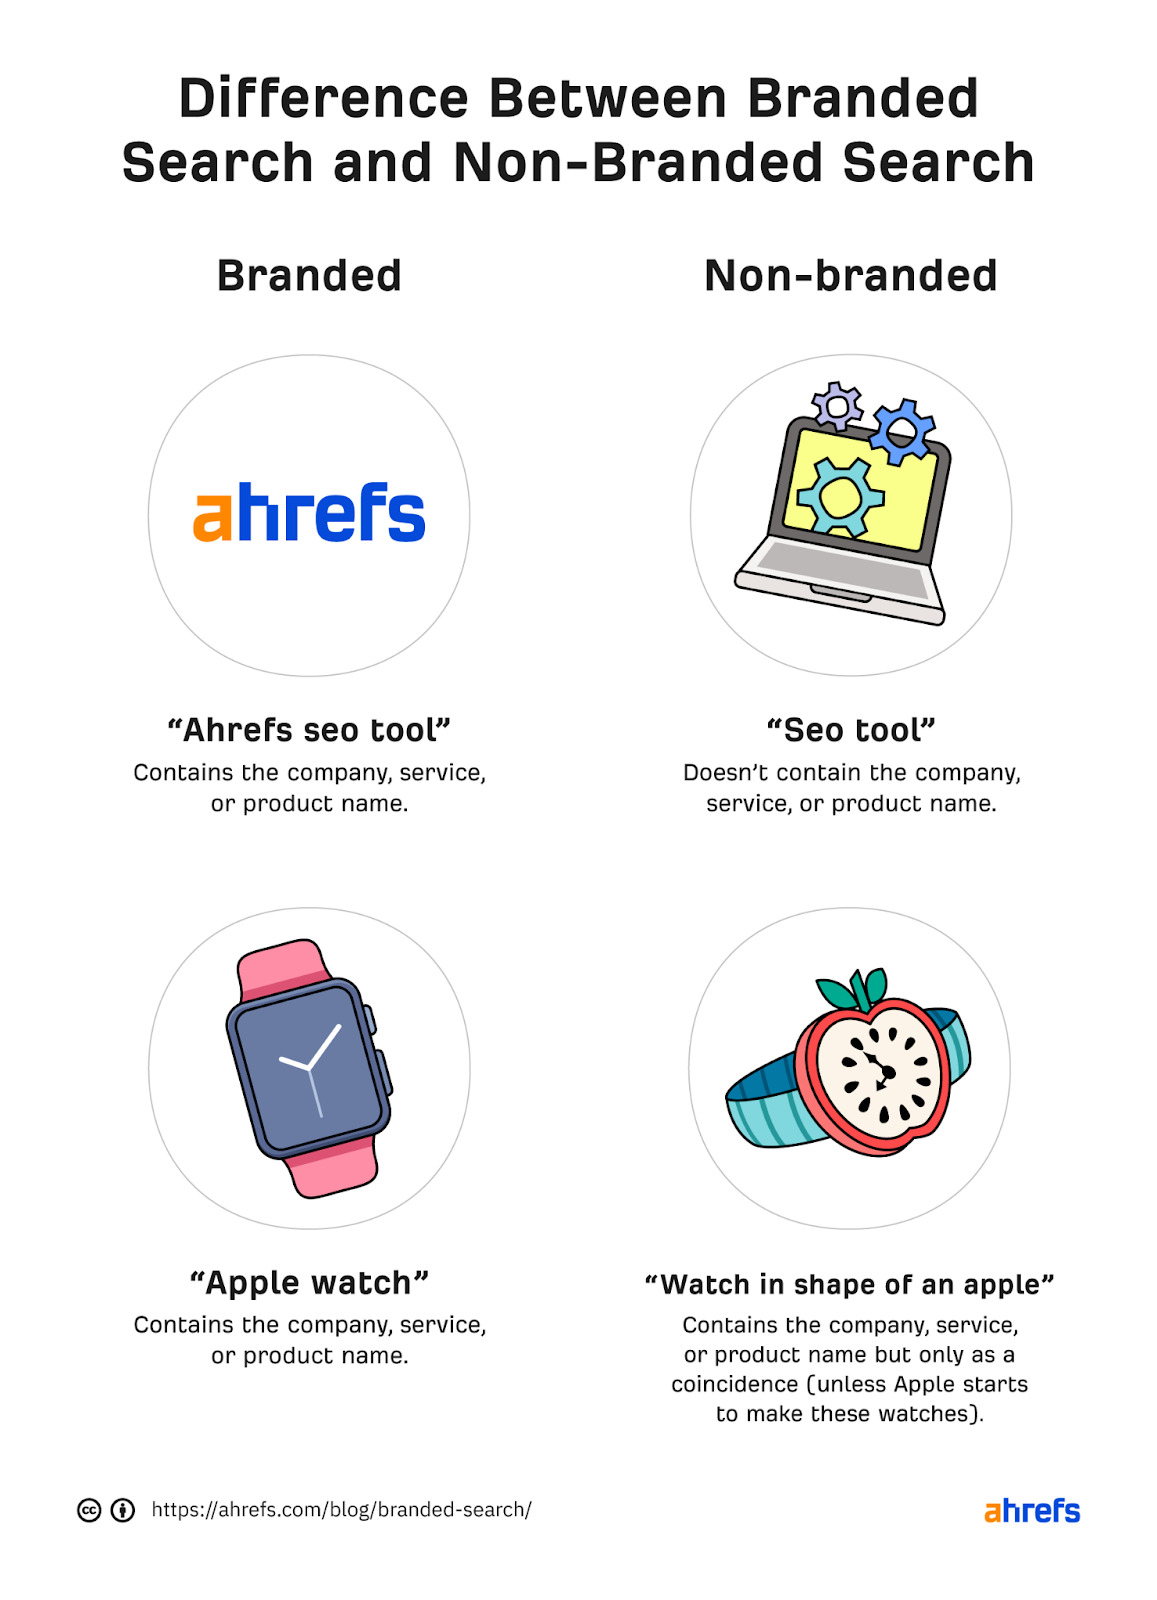 Branded Search vs. Non-Branded Search: What’s the Difference?